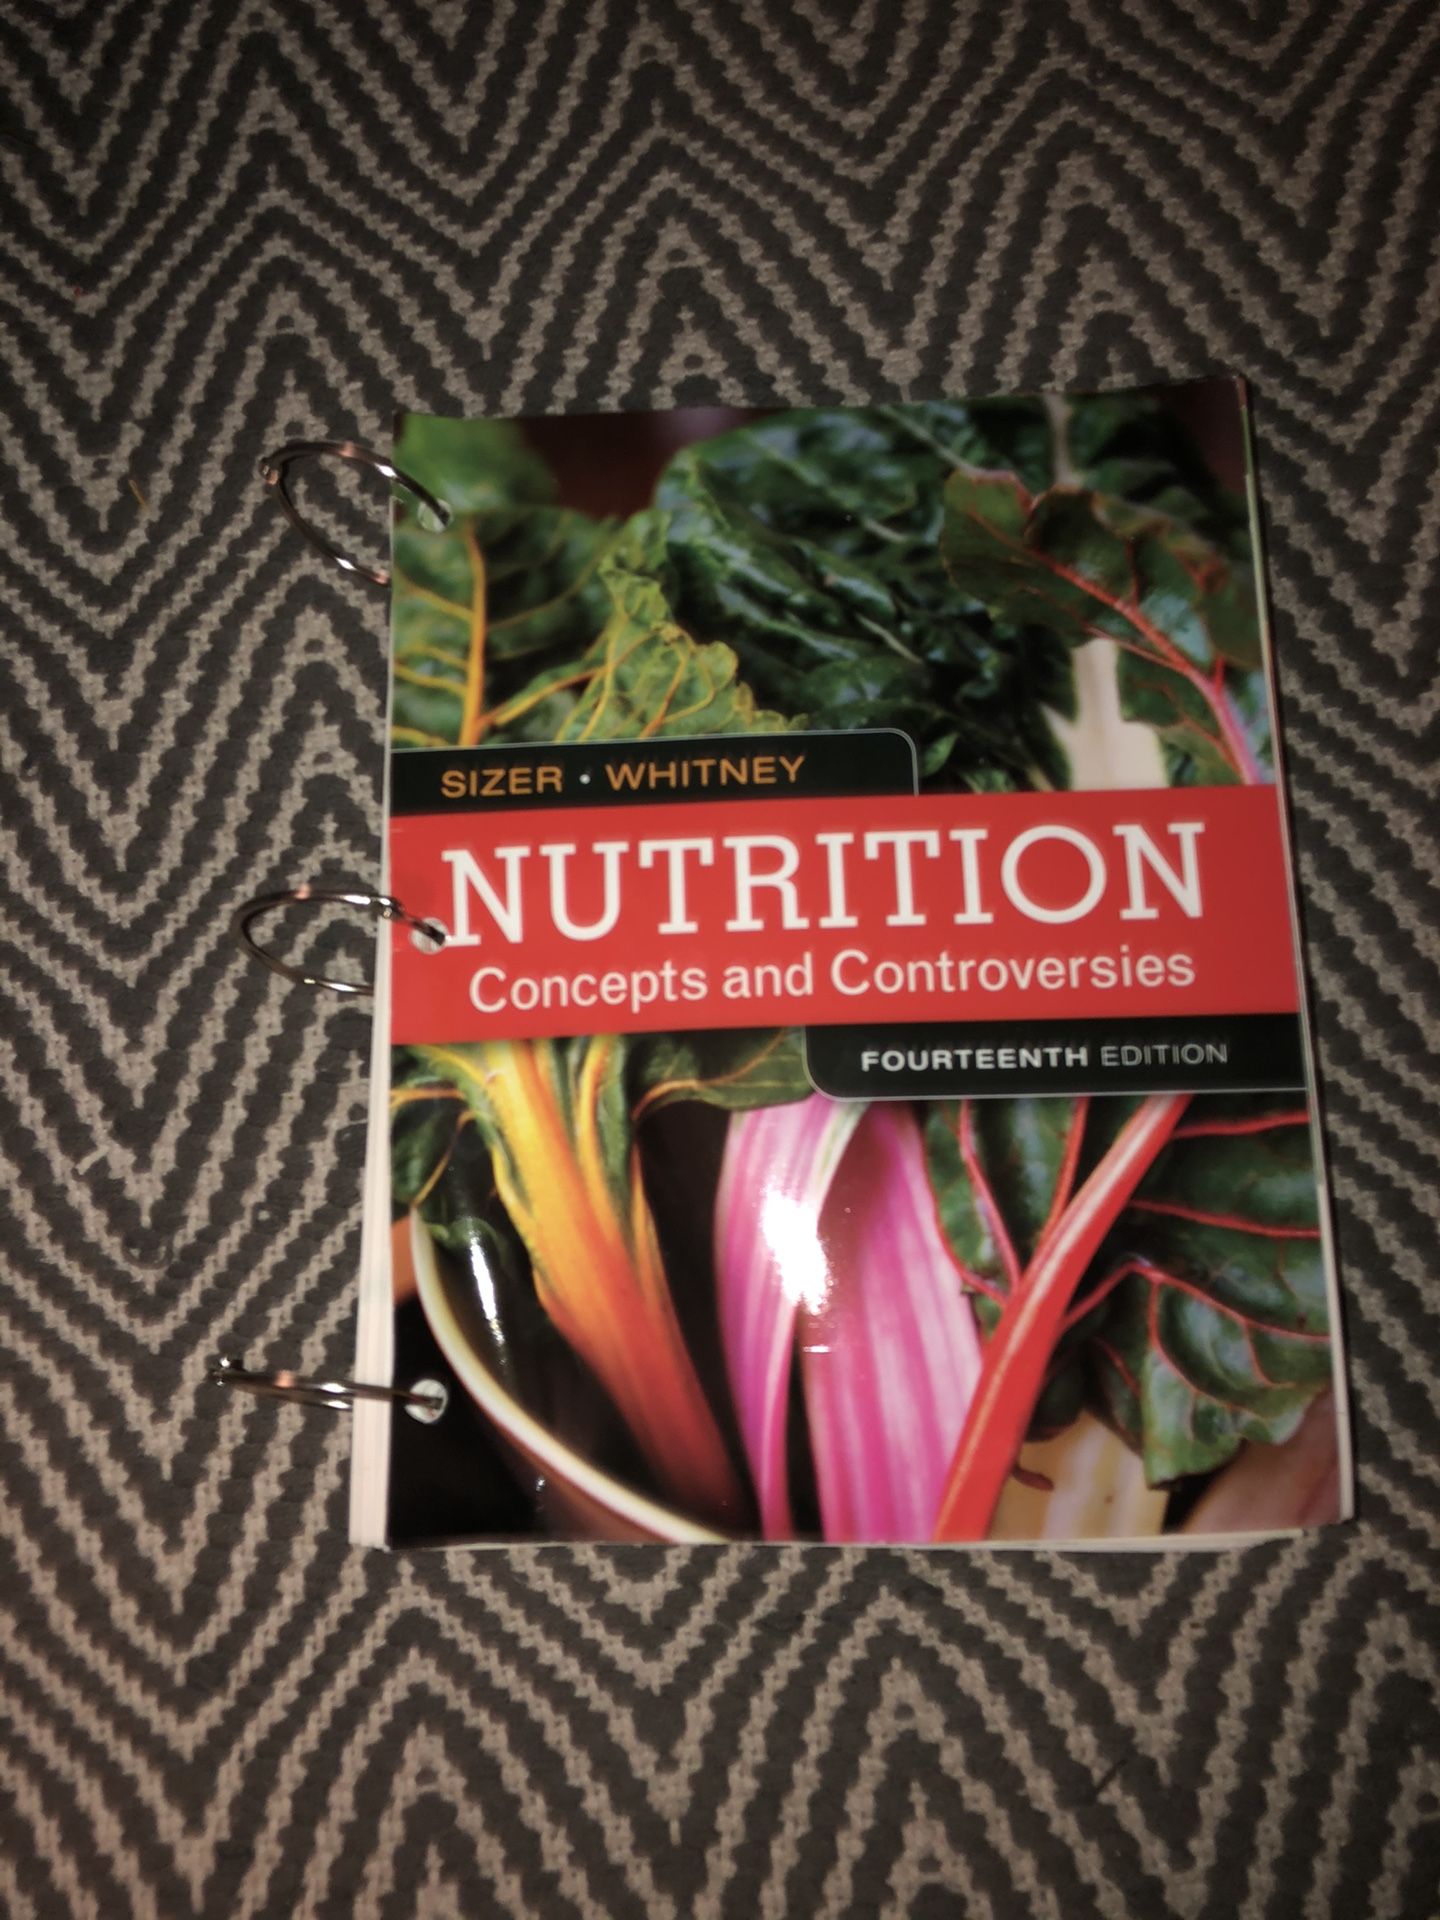 Nutrition: Concepts and Controversies 14th Edition